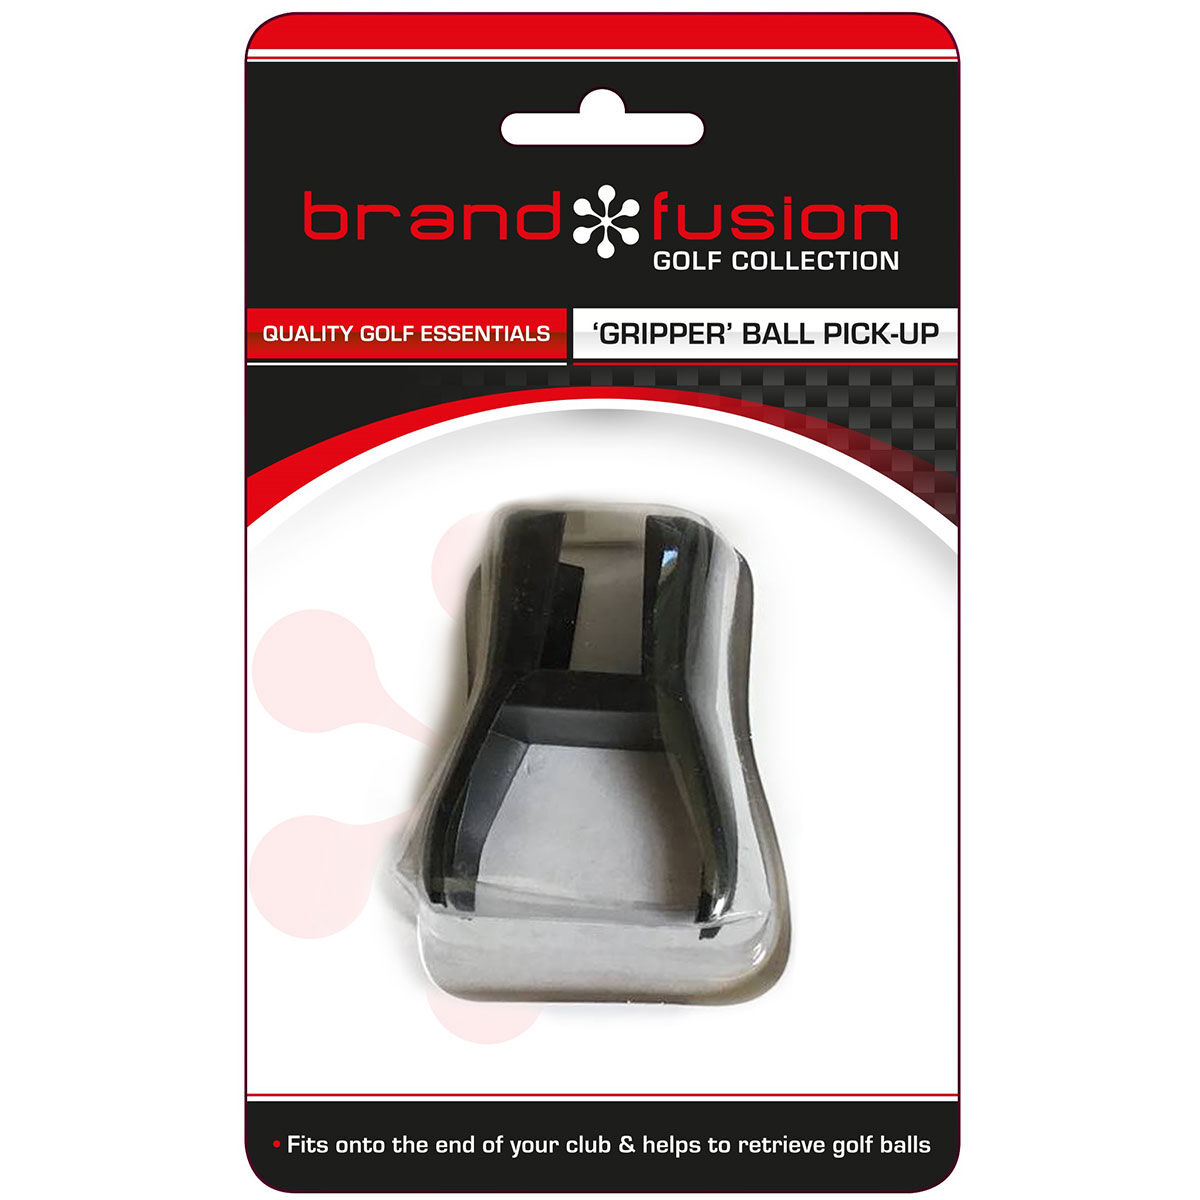 The Golfers Club Black BrandFusion Gripper Ball Pick Up, Size: One Size | American Golf